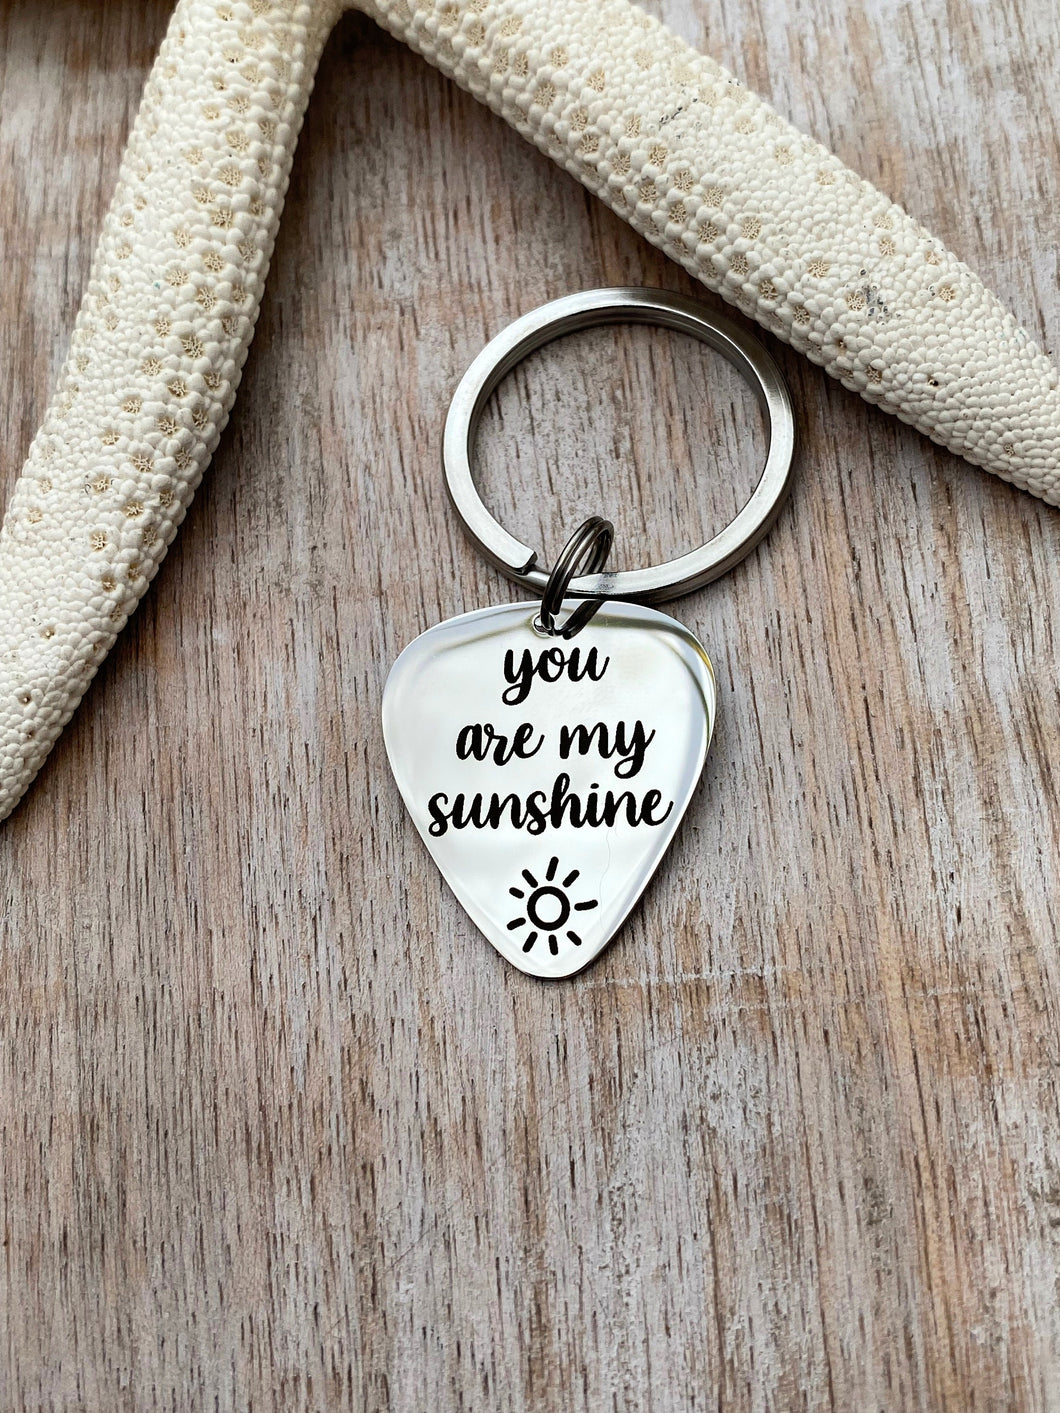 Stainless steel Guitar Pick keychain, You are my sunshine with sun design, Engraved Guitar Pick,  Inspirational, Gift for him, key chain